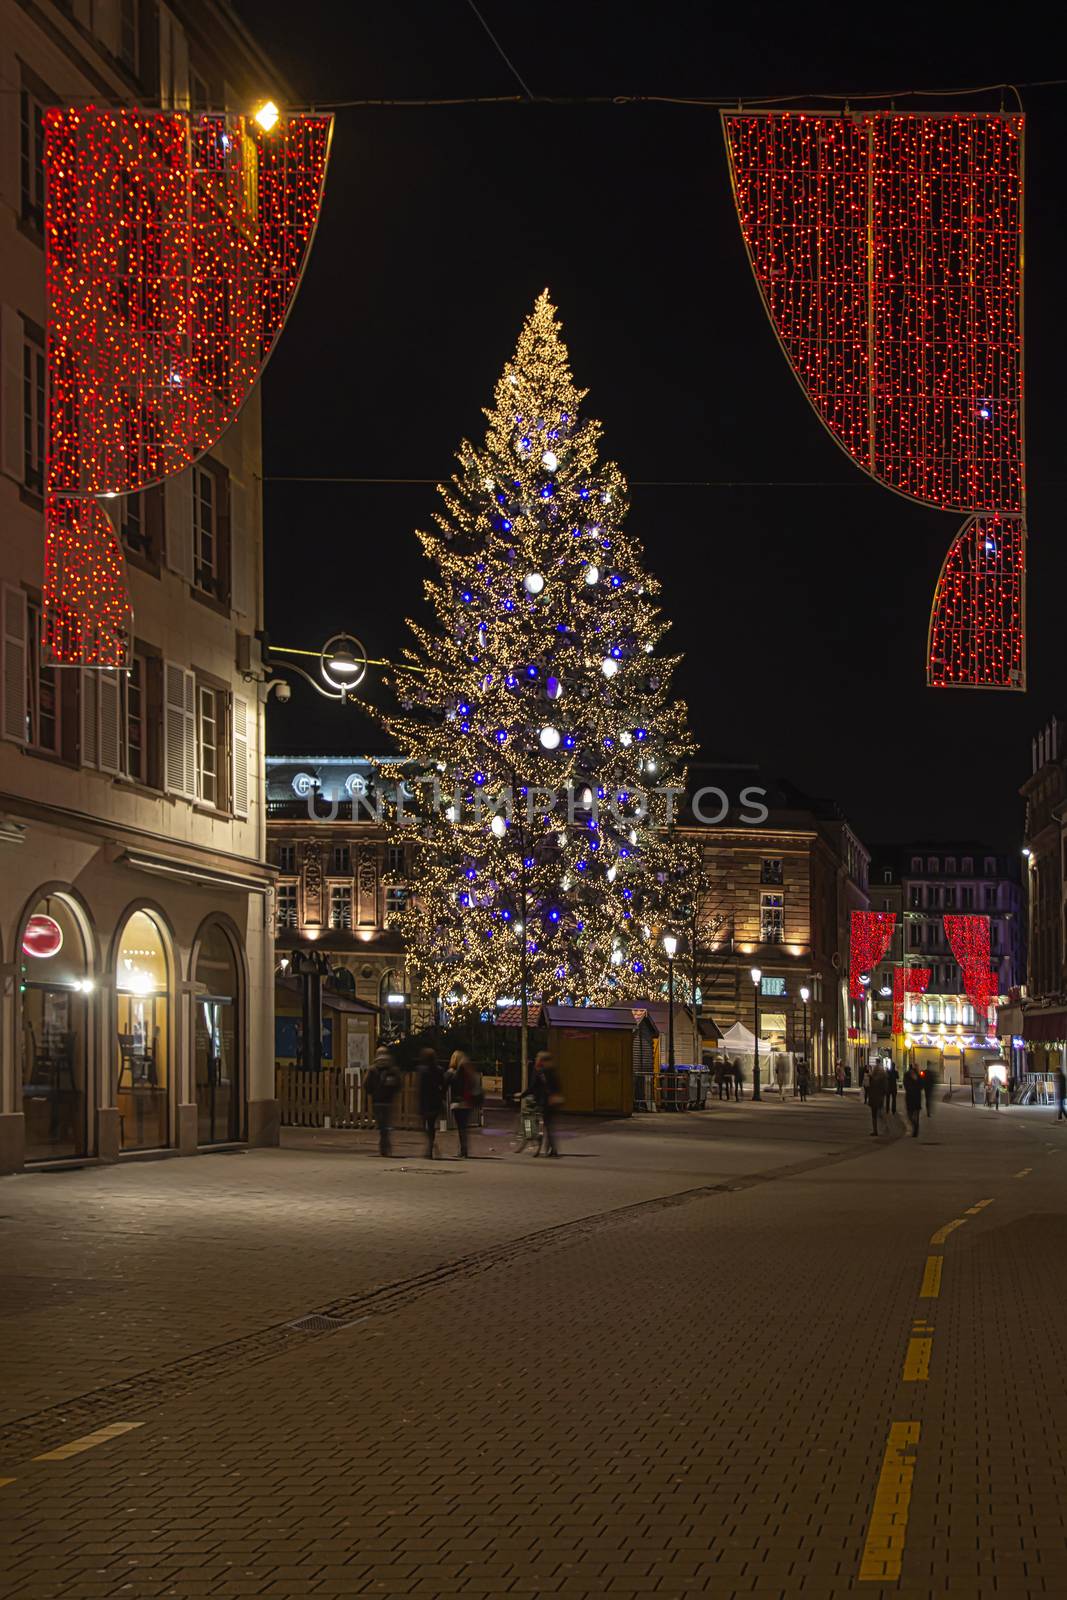 Giant Christmas tree at the Kleber place in Strasbourg city at night during the year end celebration, Strasbourg, France